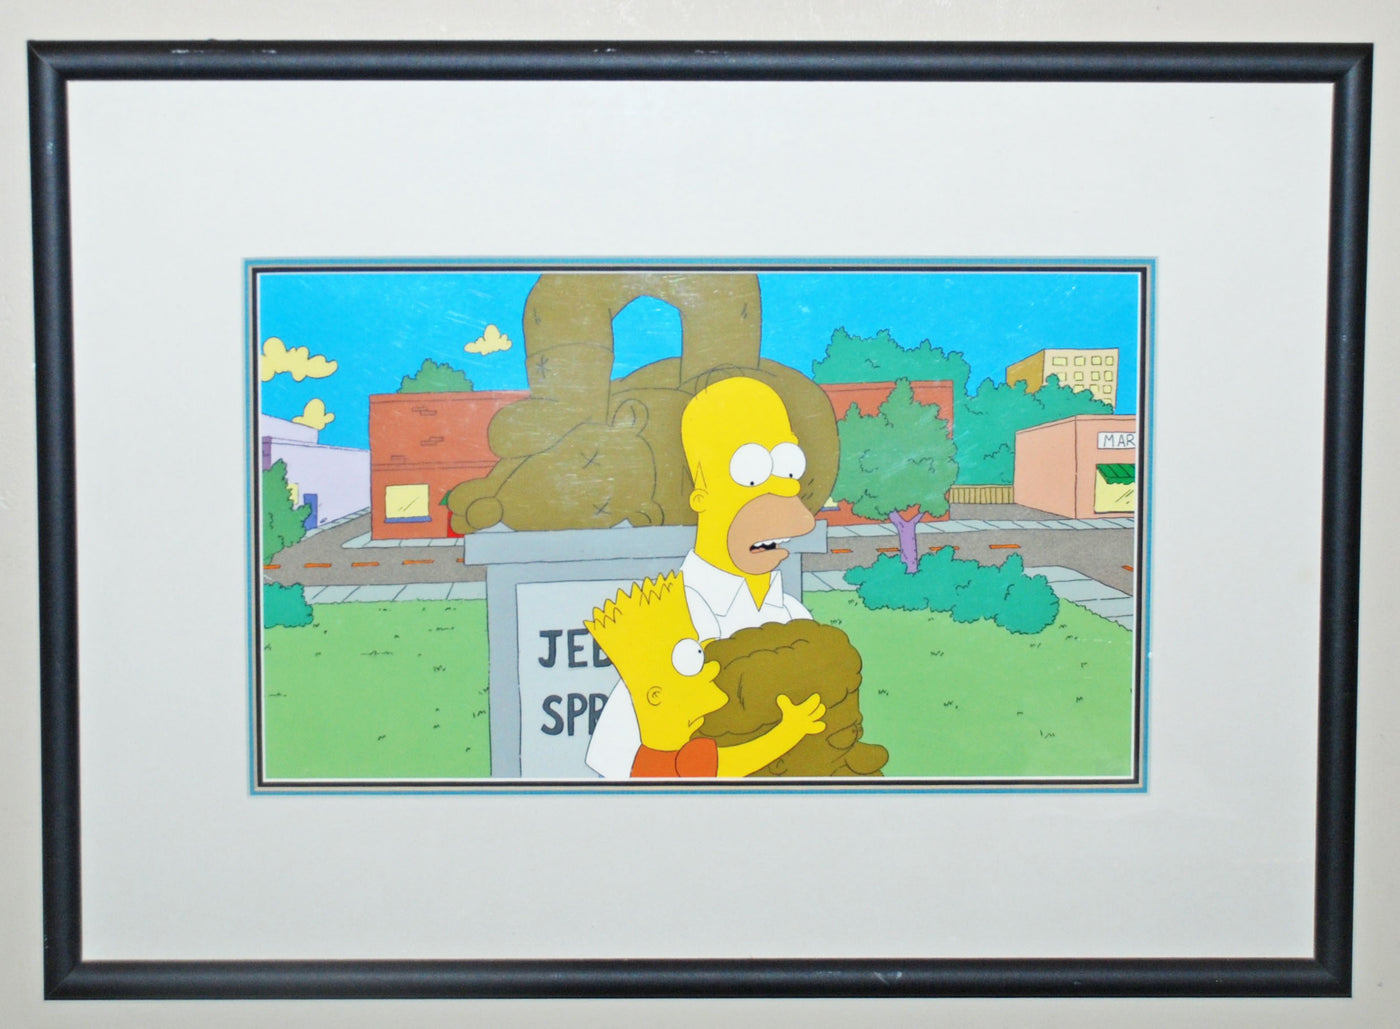 Original Simpsons Production Cel from the Simpsons featuring Homer and Bart